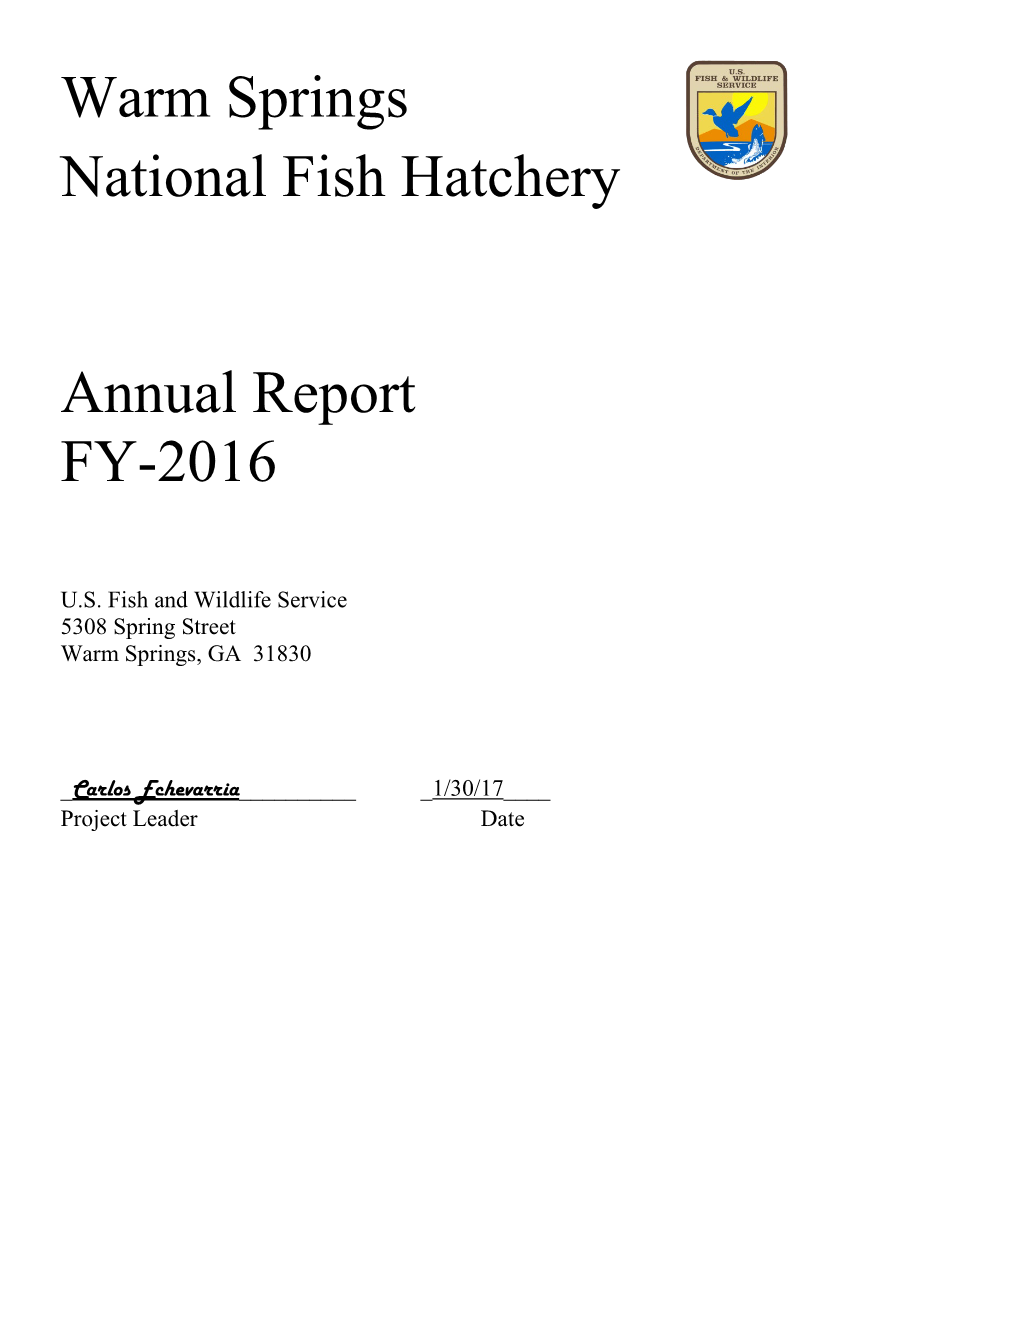 Warm Springs National Fish Hatchery Annual Report FY-2016